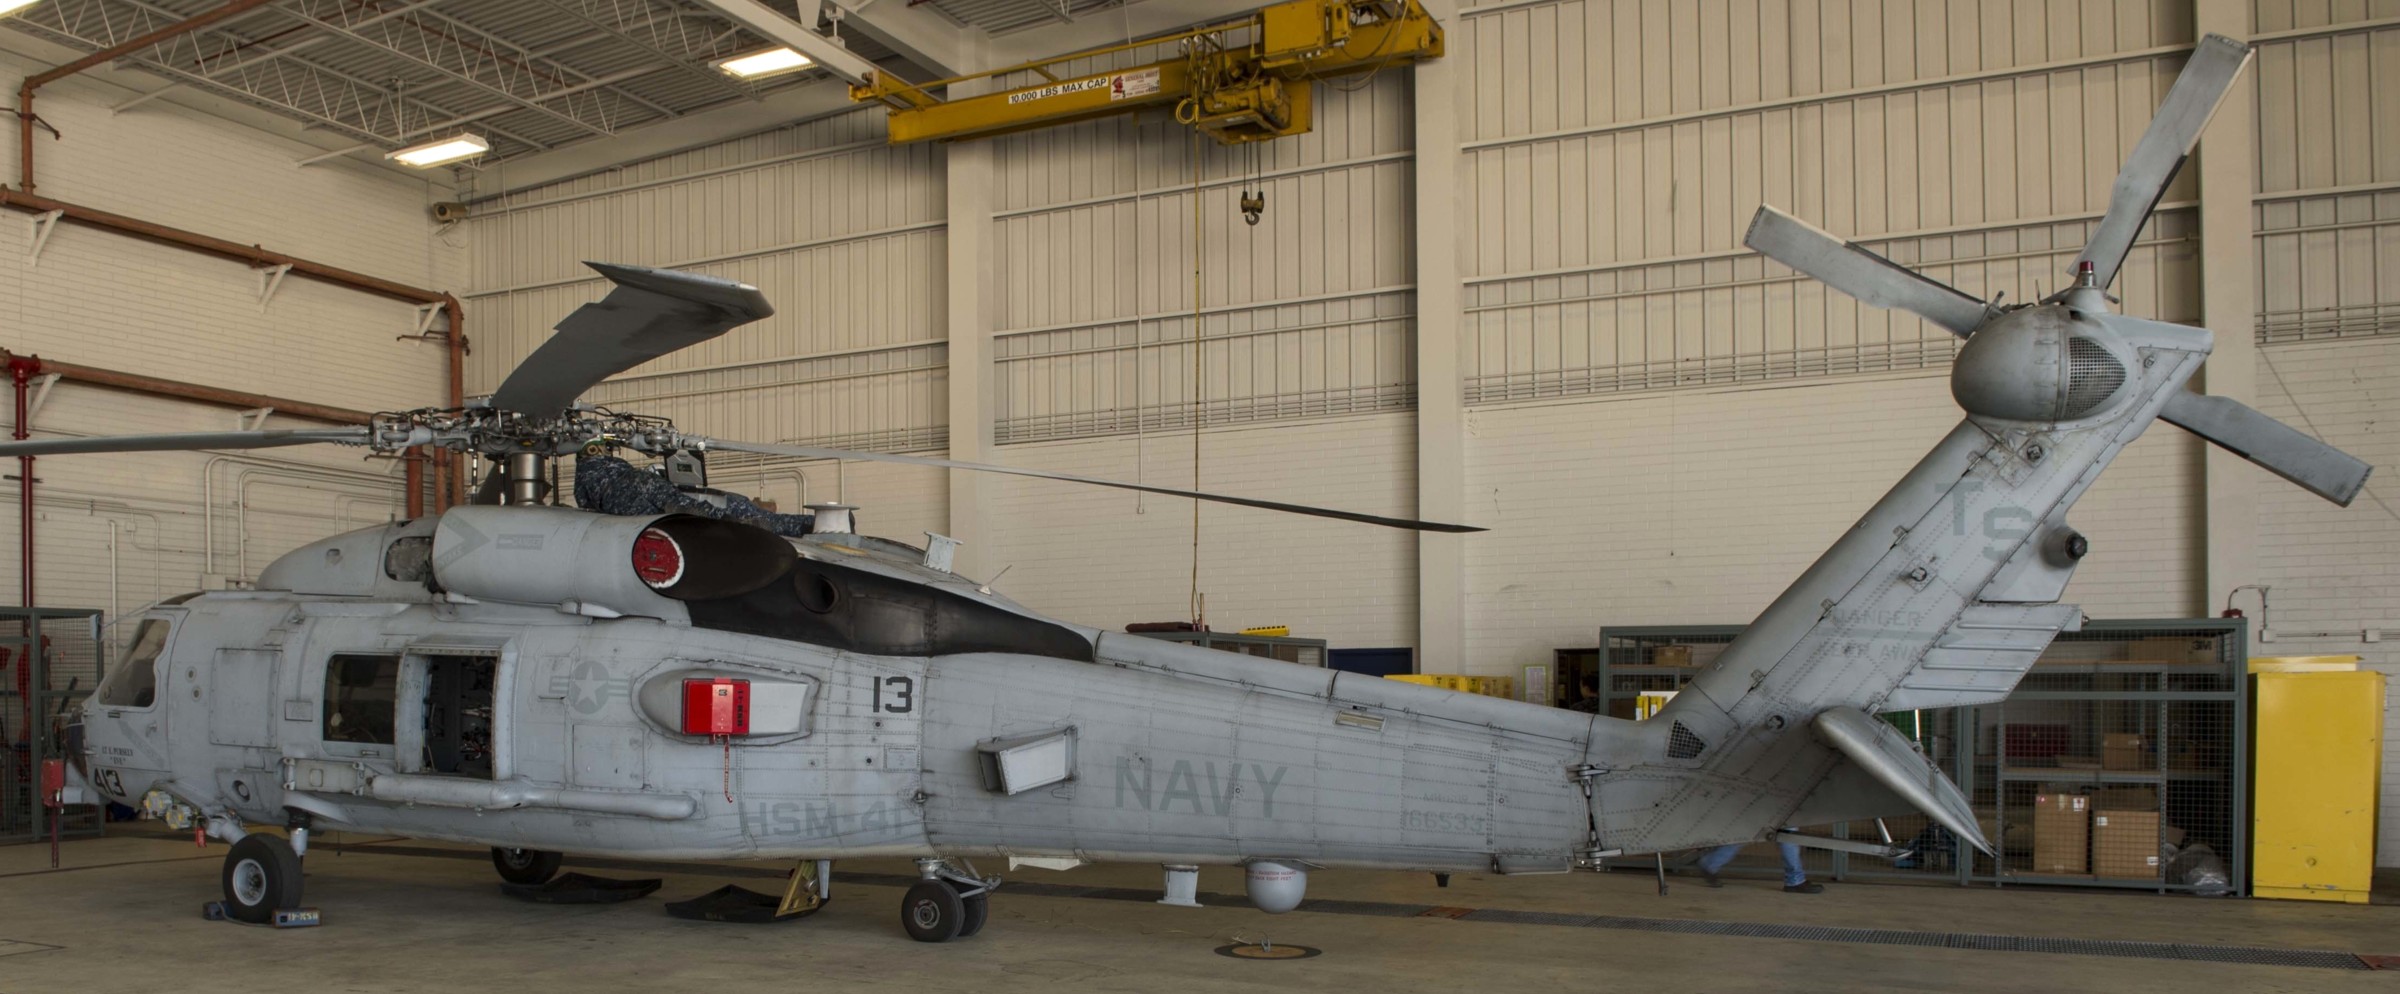 hsm-41 seahawks helicopter maritime strike squadron mh-60r fleet replacement navy 2015 19